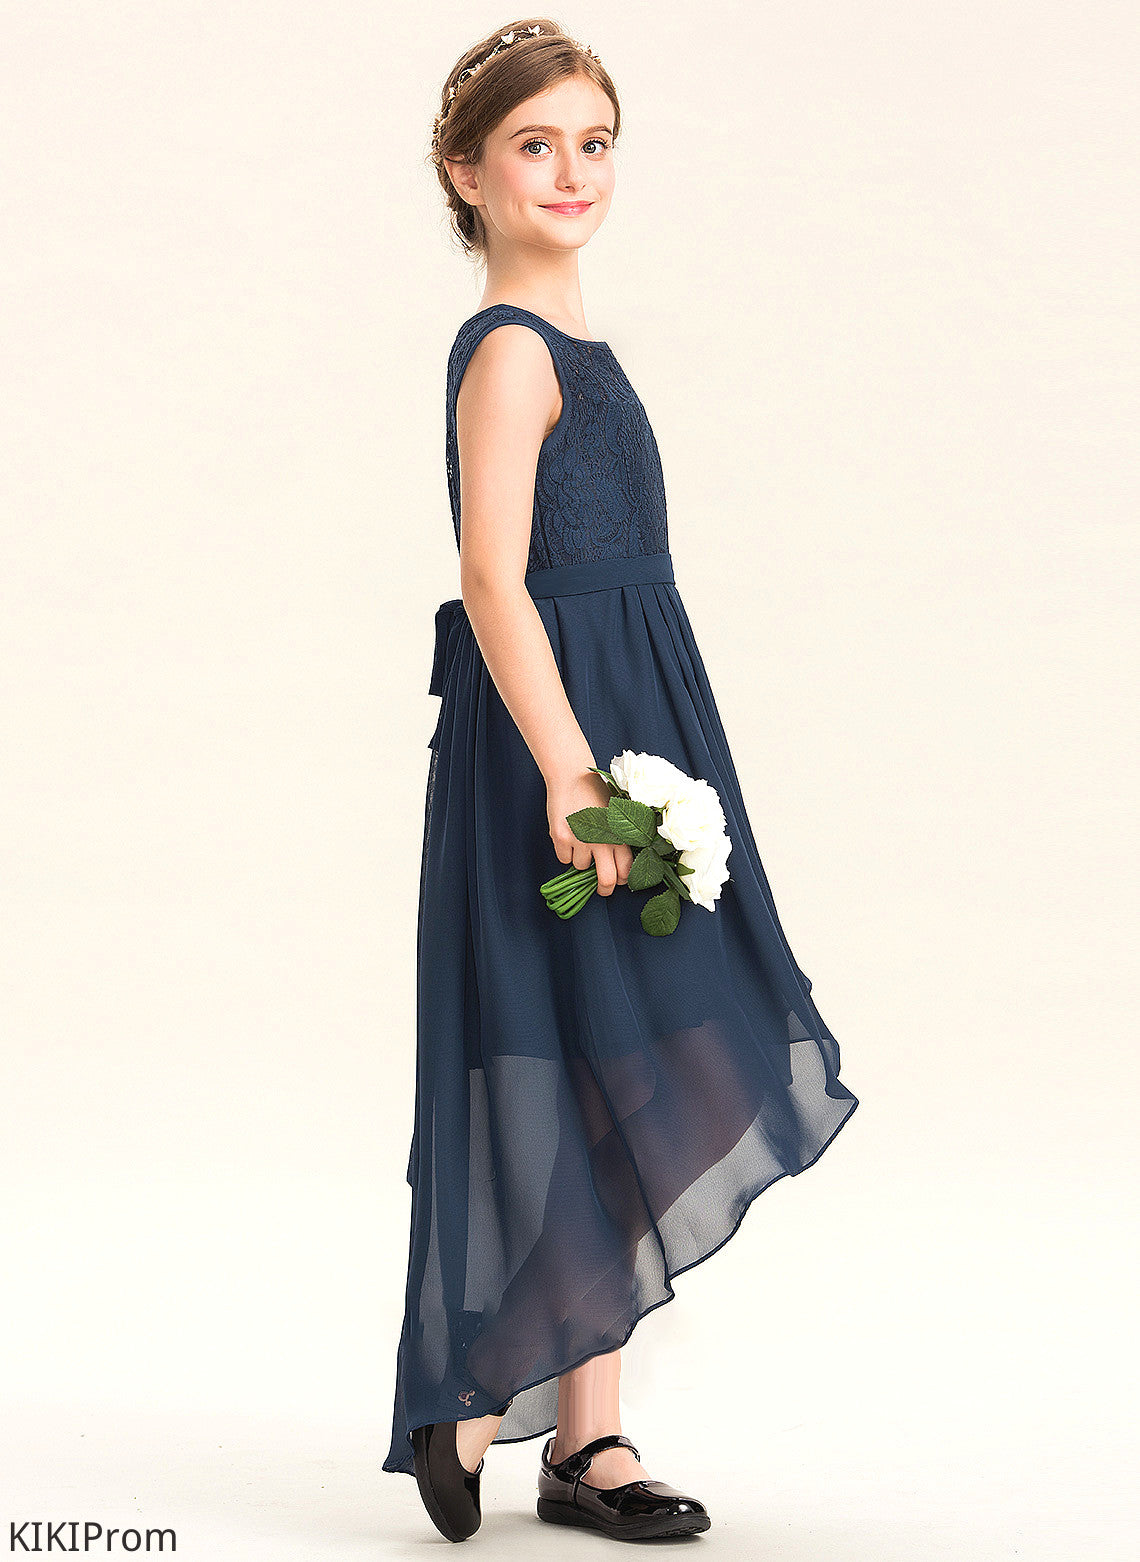 Asymmetrical Chiffon Beryl Scoop Neck Bow(s) Ruffles Junior Bridesmaid Dresses With Cascading Lace A-Line